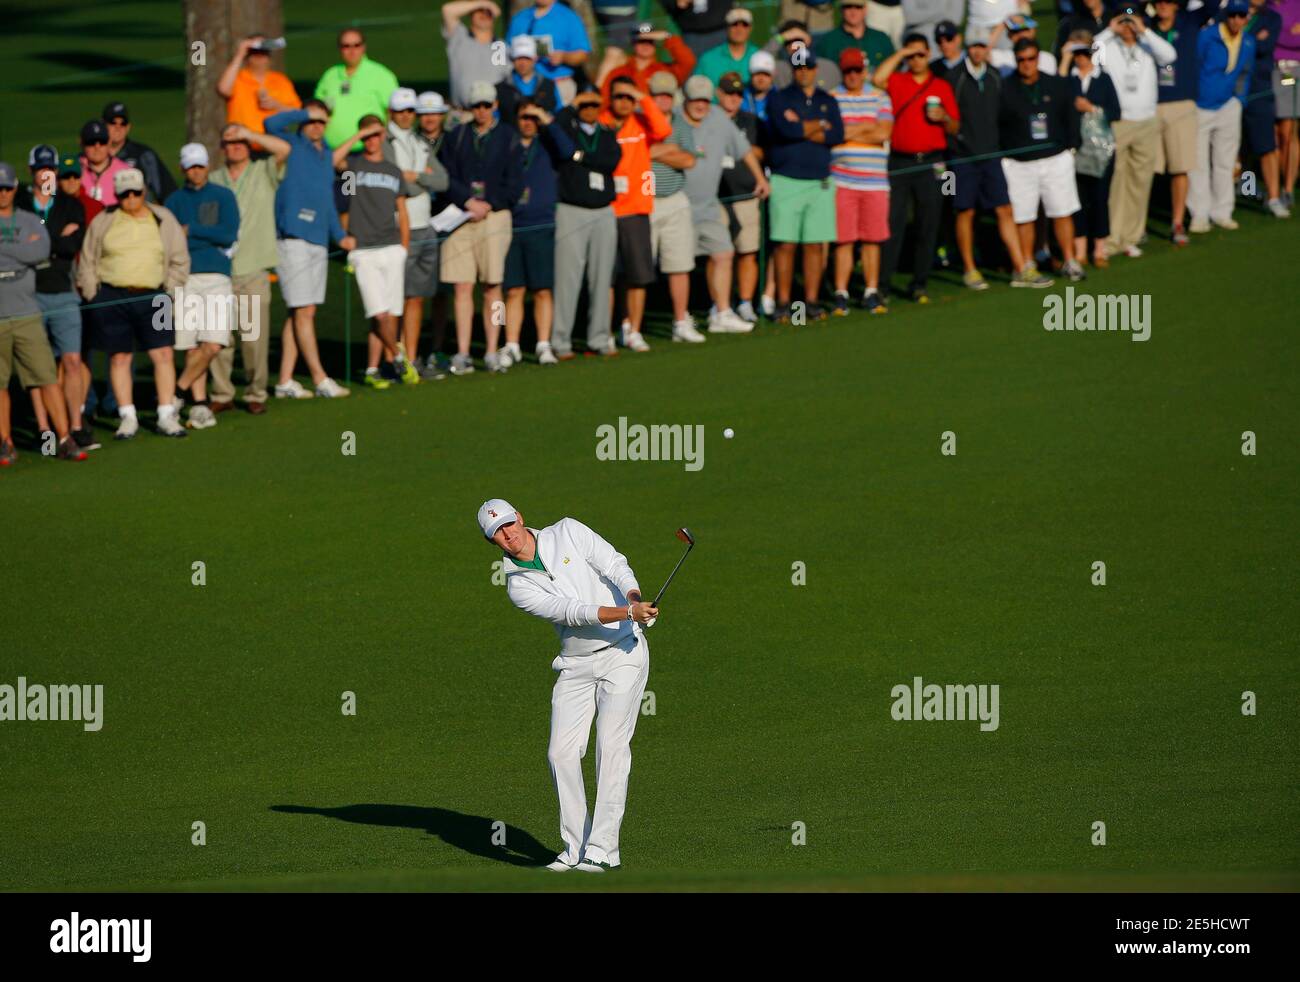 U.S. amateur golfer Jordan Niebrugge hits from the second green during the first round of the 2014 Masters golf tournament at the Augusta National Golf Club in Augusta, Georgia April 10, 2014. REUTERS/Brian Snyder (UNITED STATES  - Tags: SPORT GOLF) Stock Photo